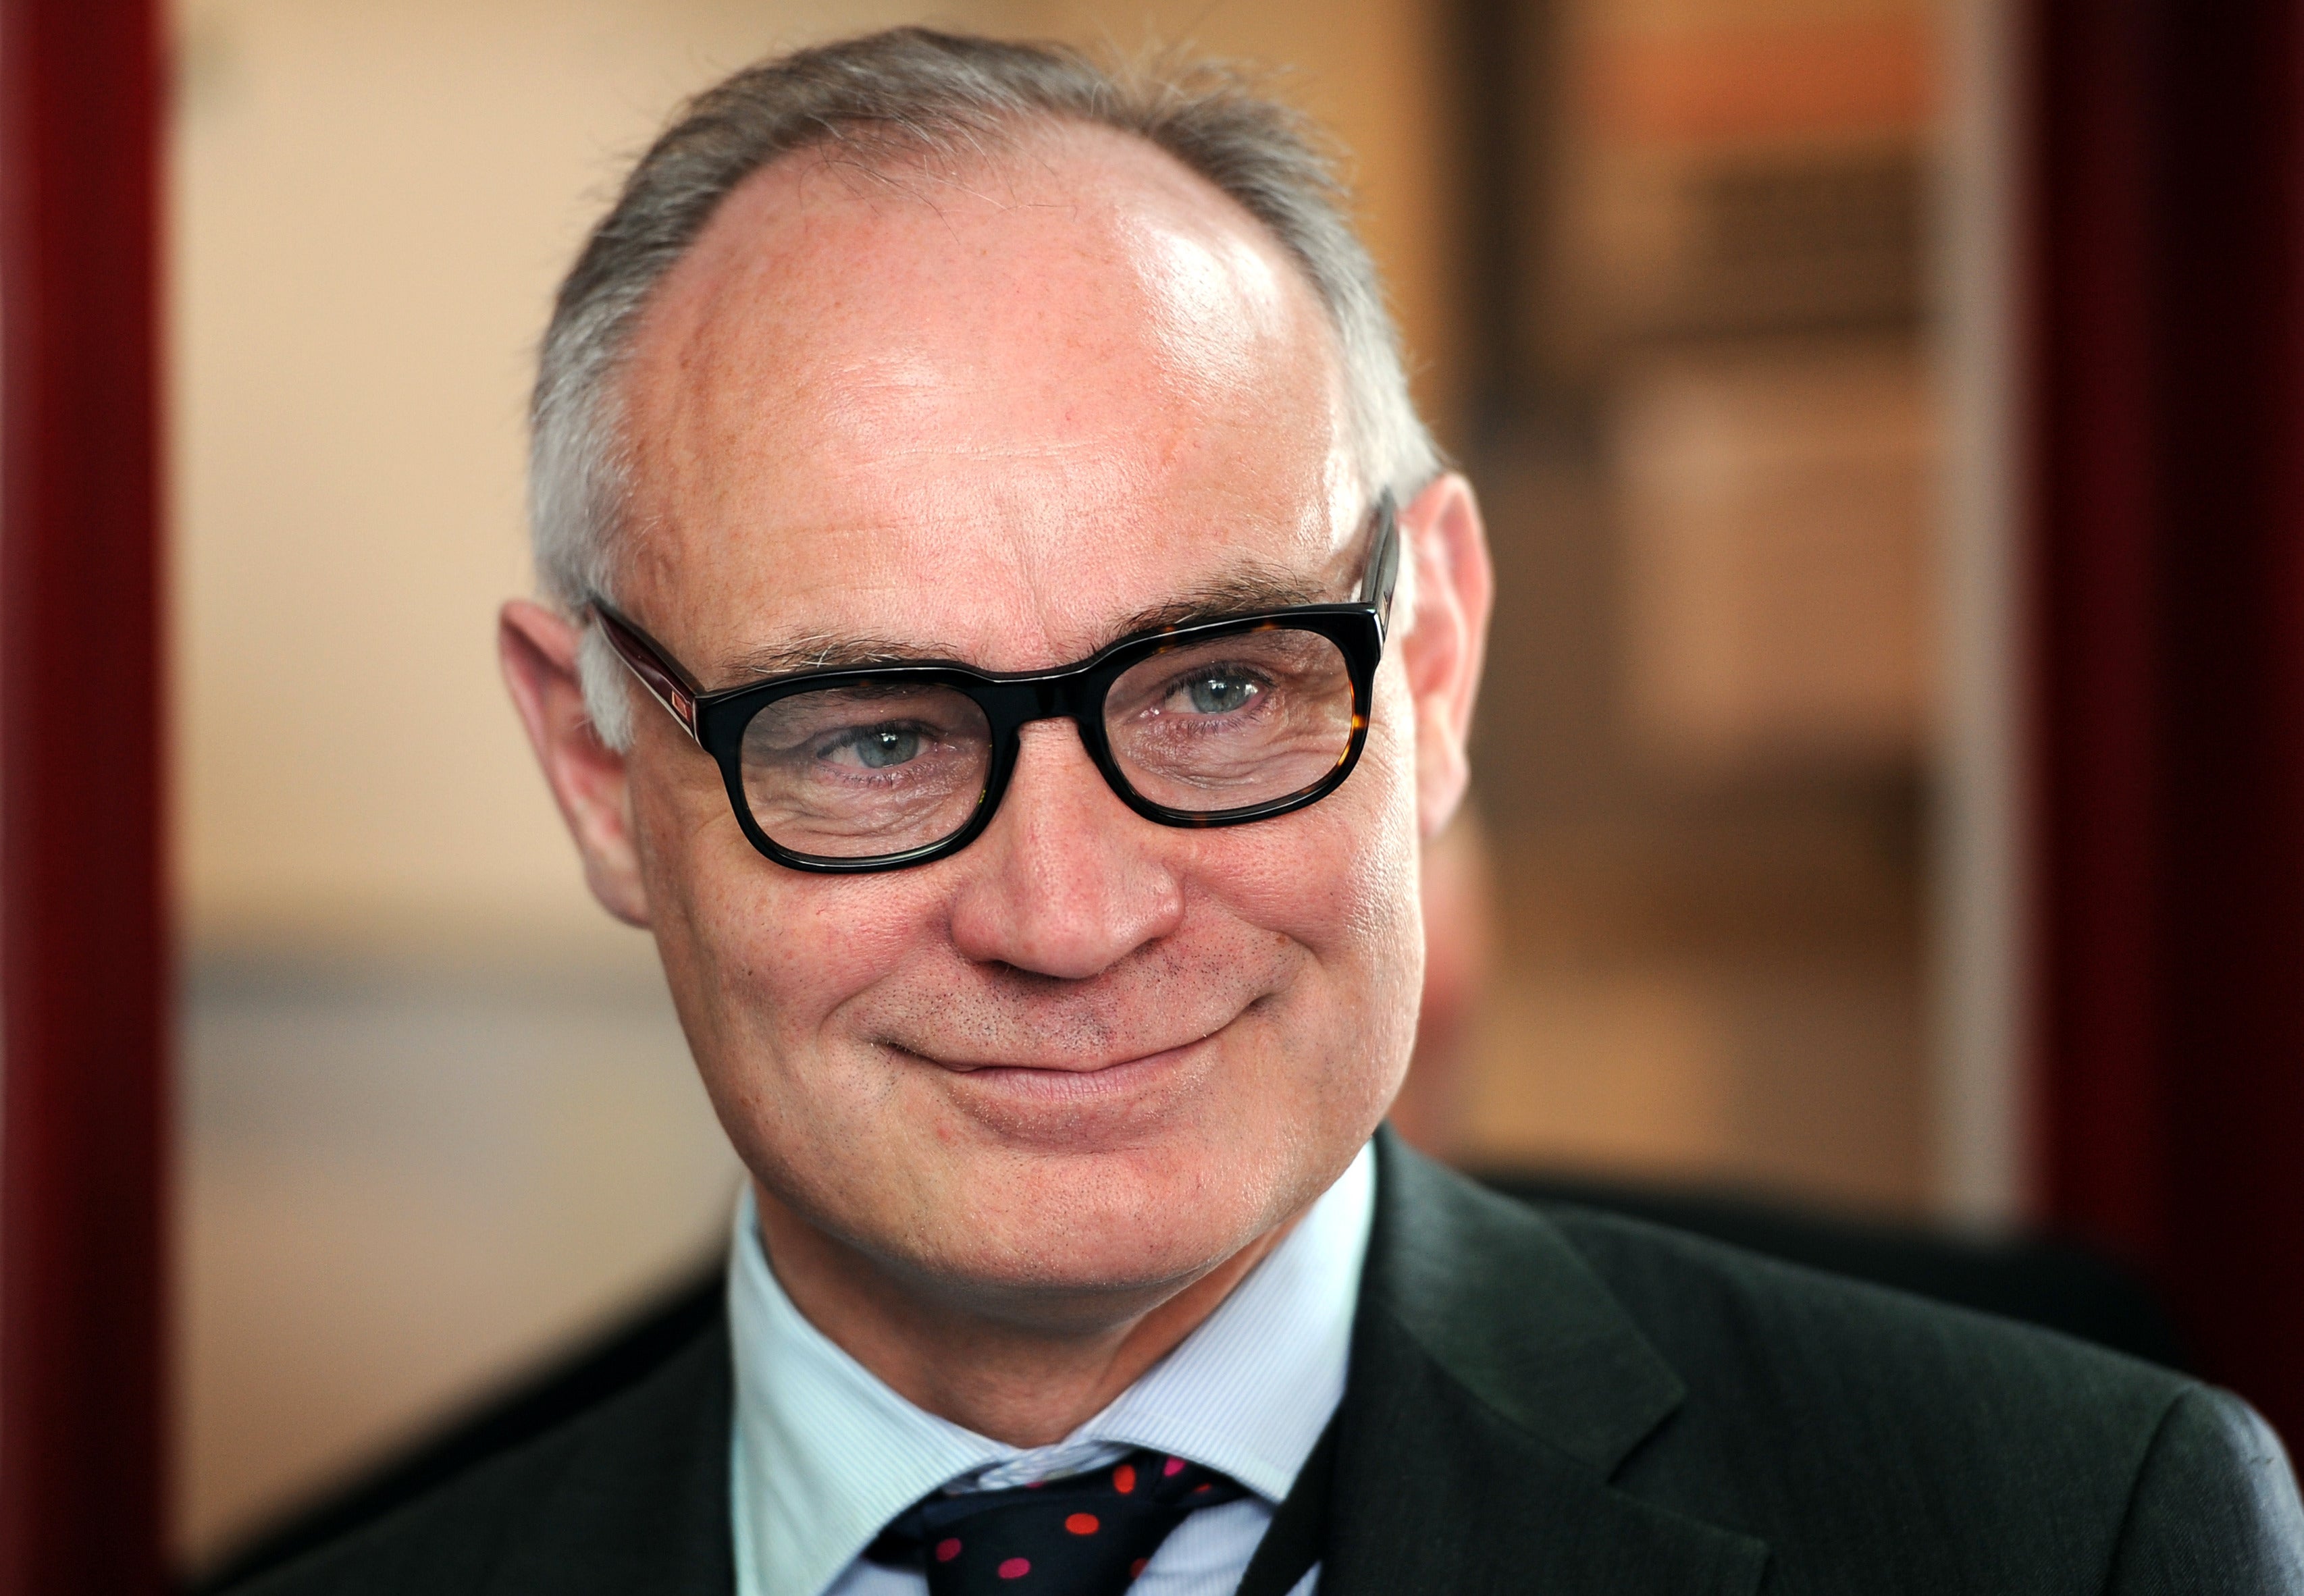 Crispin Blunt, the former minister and current chair of the Foreign Affairs Committee